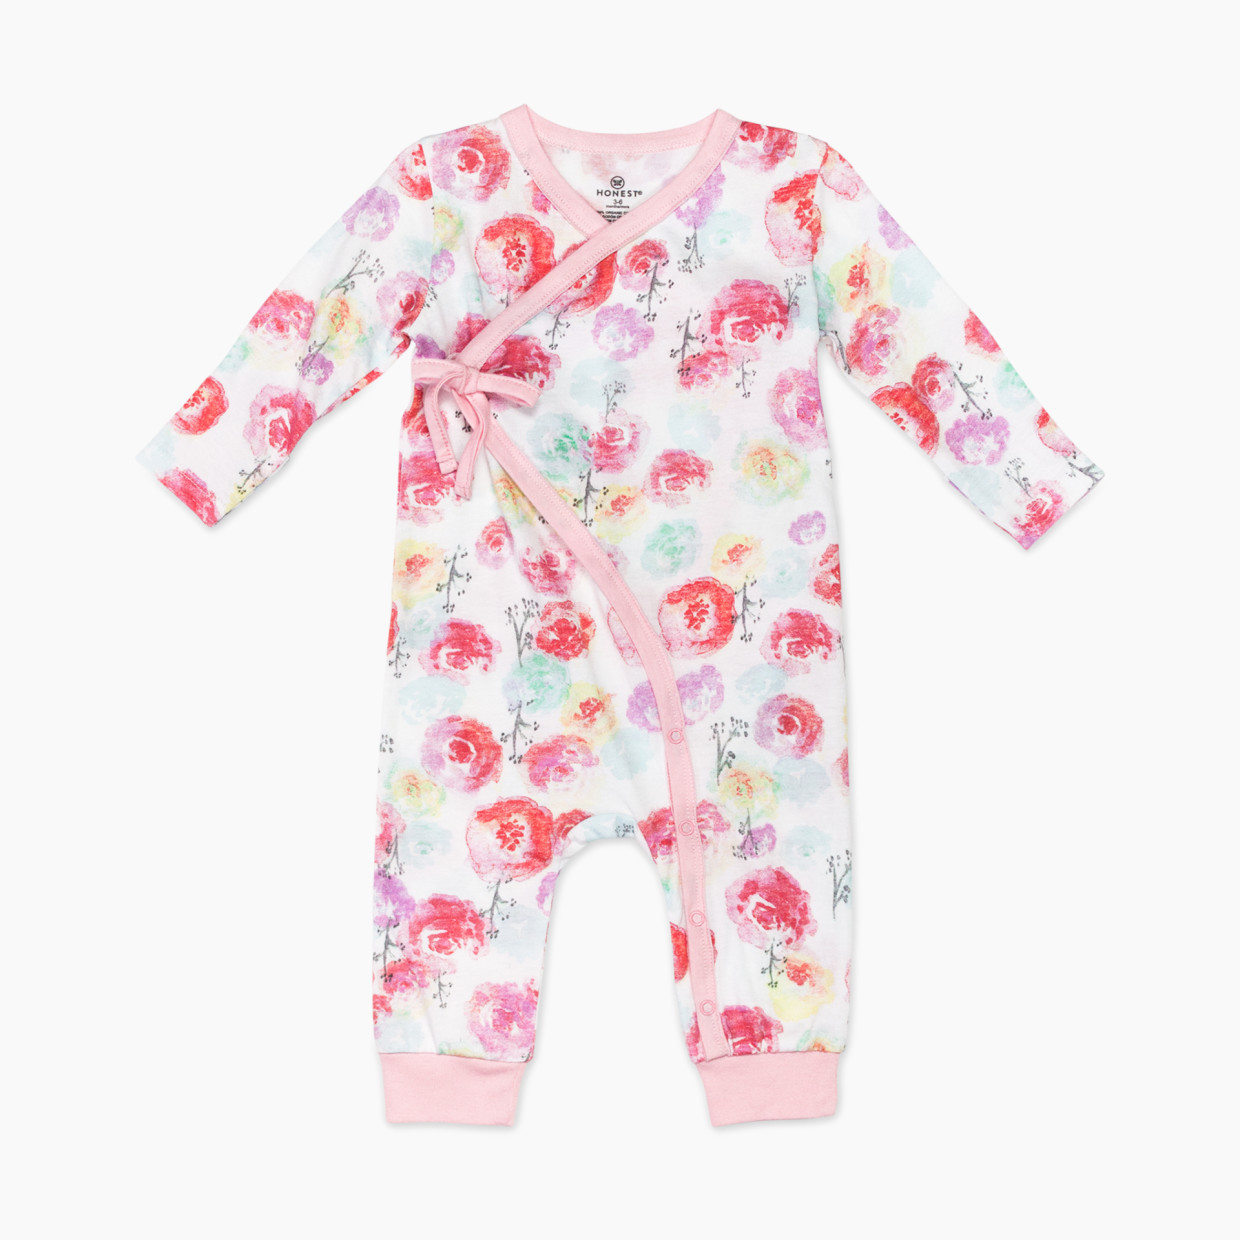 Honest Baby Clothing Organic Cotton Side Tie Coverall - Rose Blossom, 3-6 M.